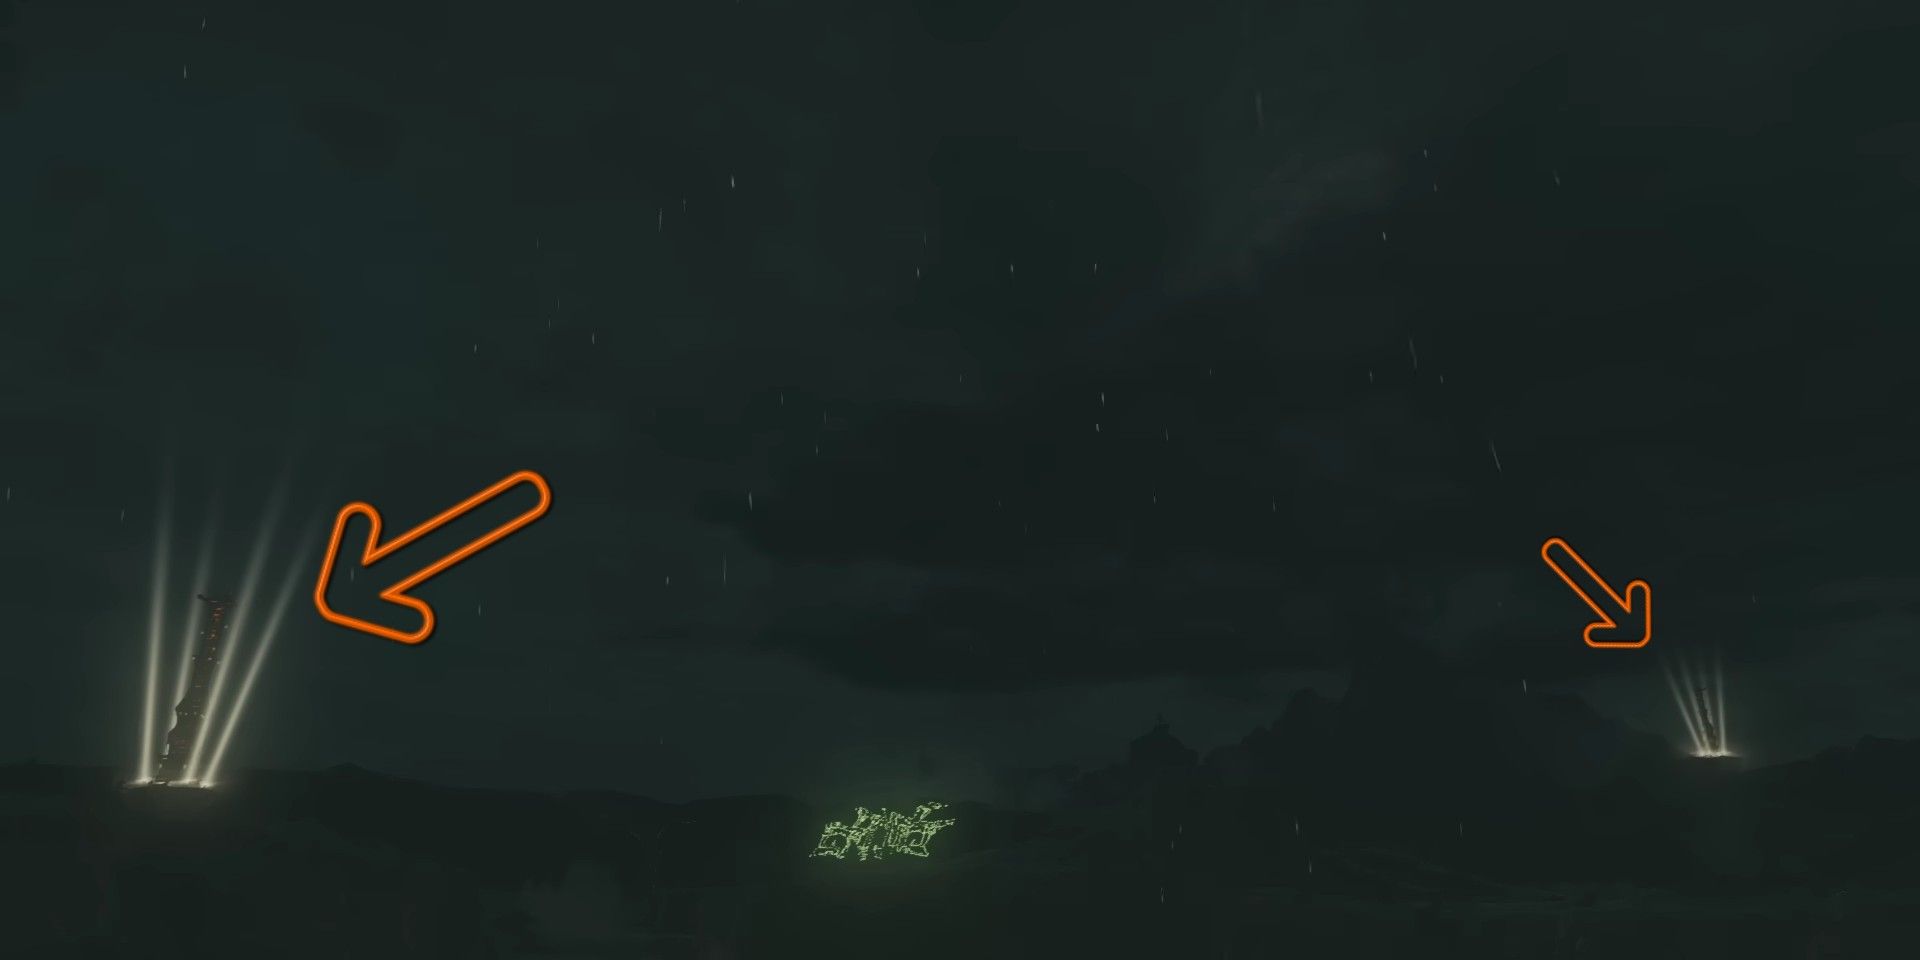 Tears of the Kingdom screenshot featuring orange arrows pointing toward two glowing towers